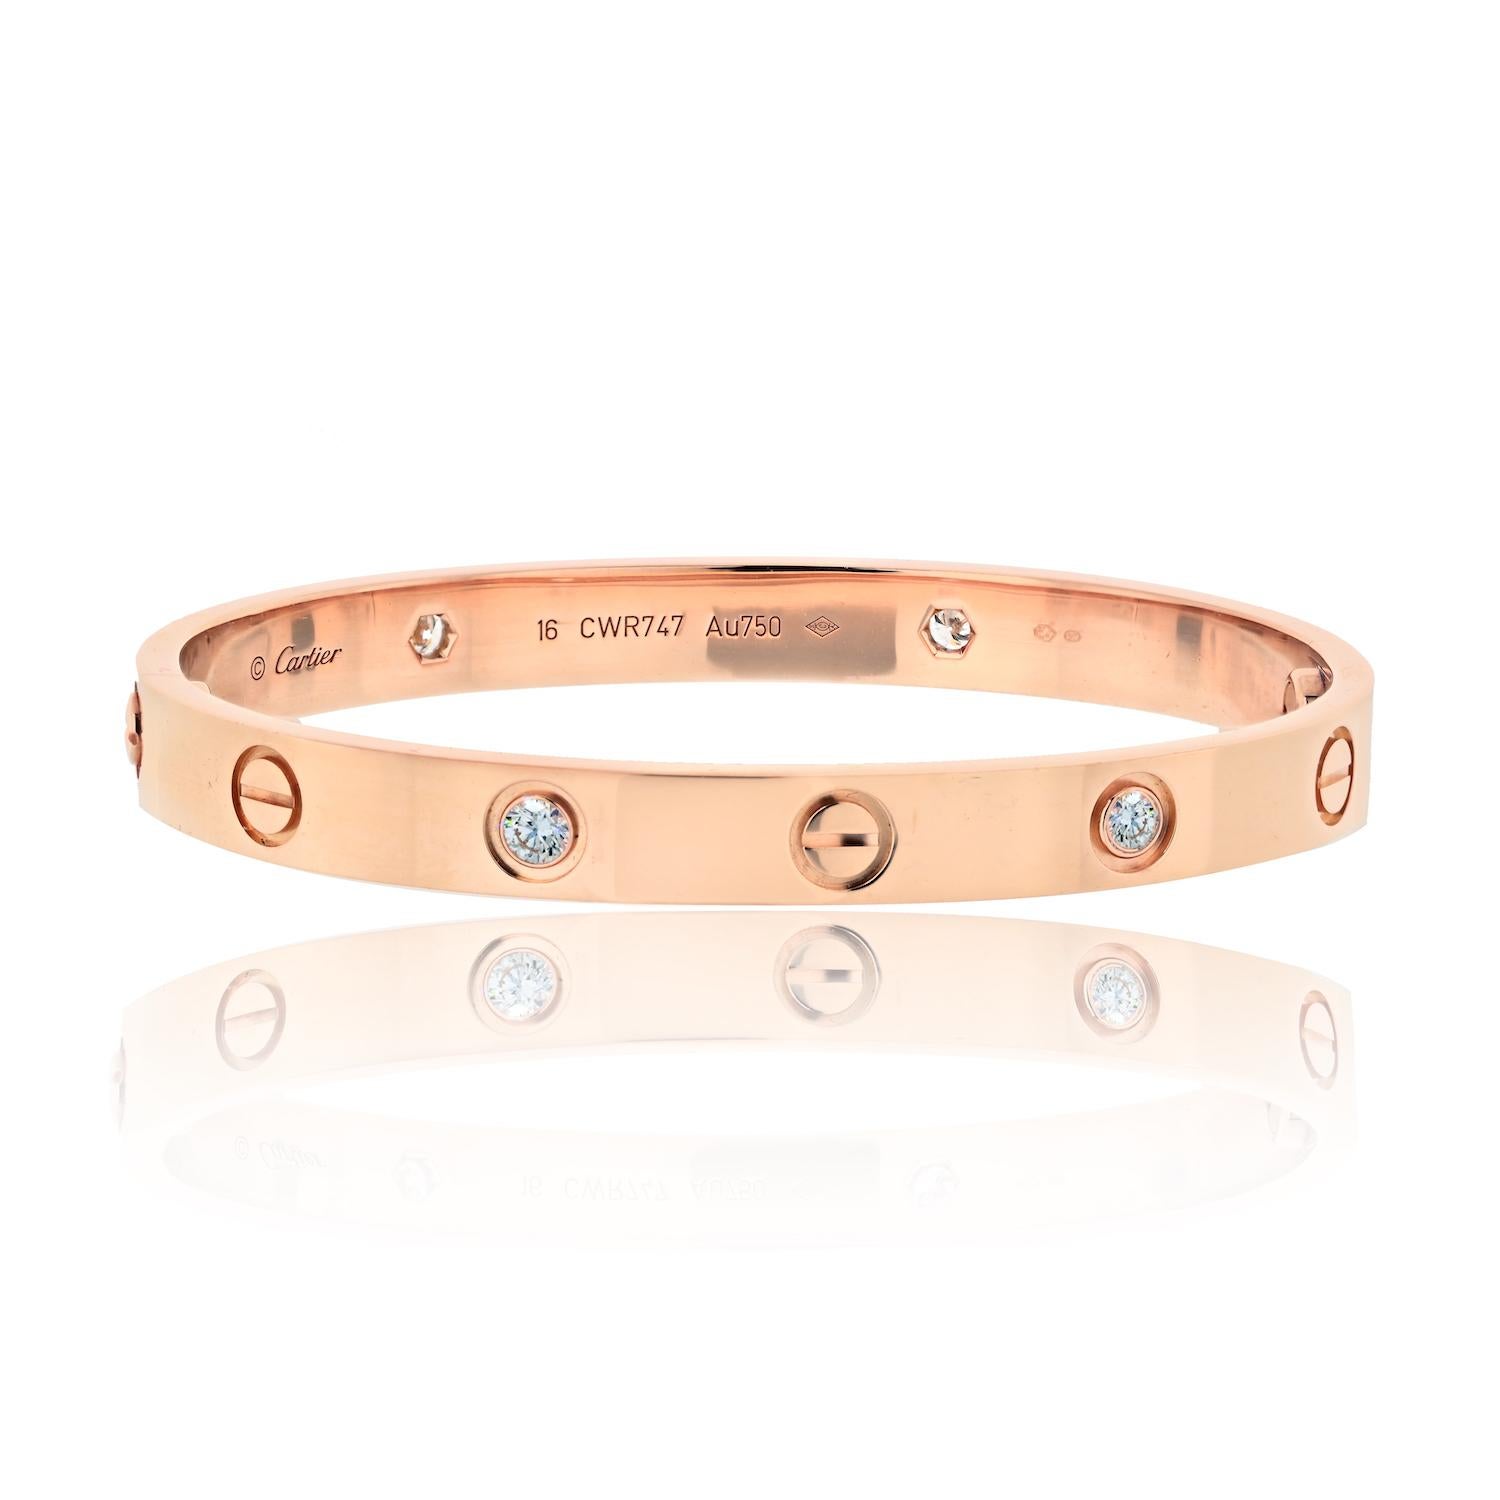 The pre-owned Cartier 18K Rose Gold Love With 4 Diamonds Bracelet is a stunning piece of jewelry that exudes elegance and sophistication. This particular bracelet is in excellent condition and has been well-maintained, ensuring that it looks as good